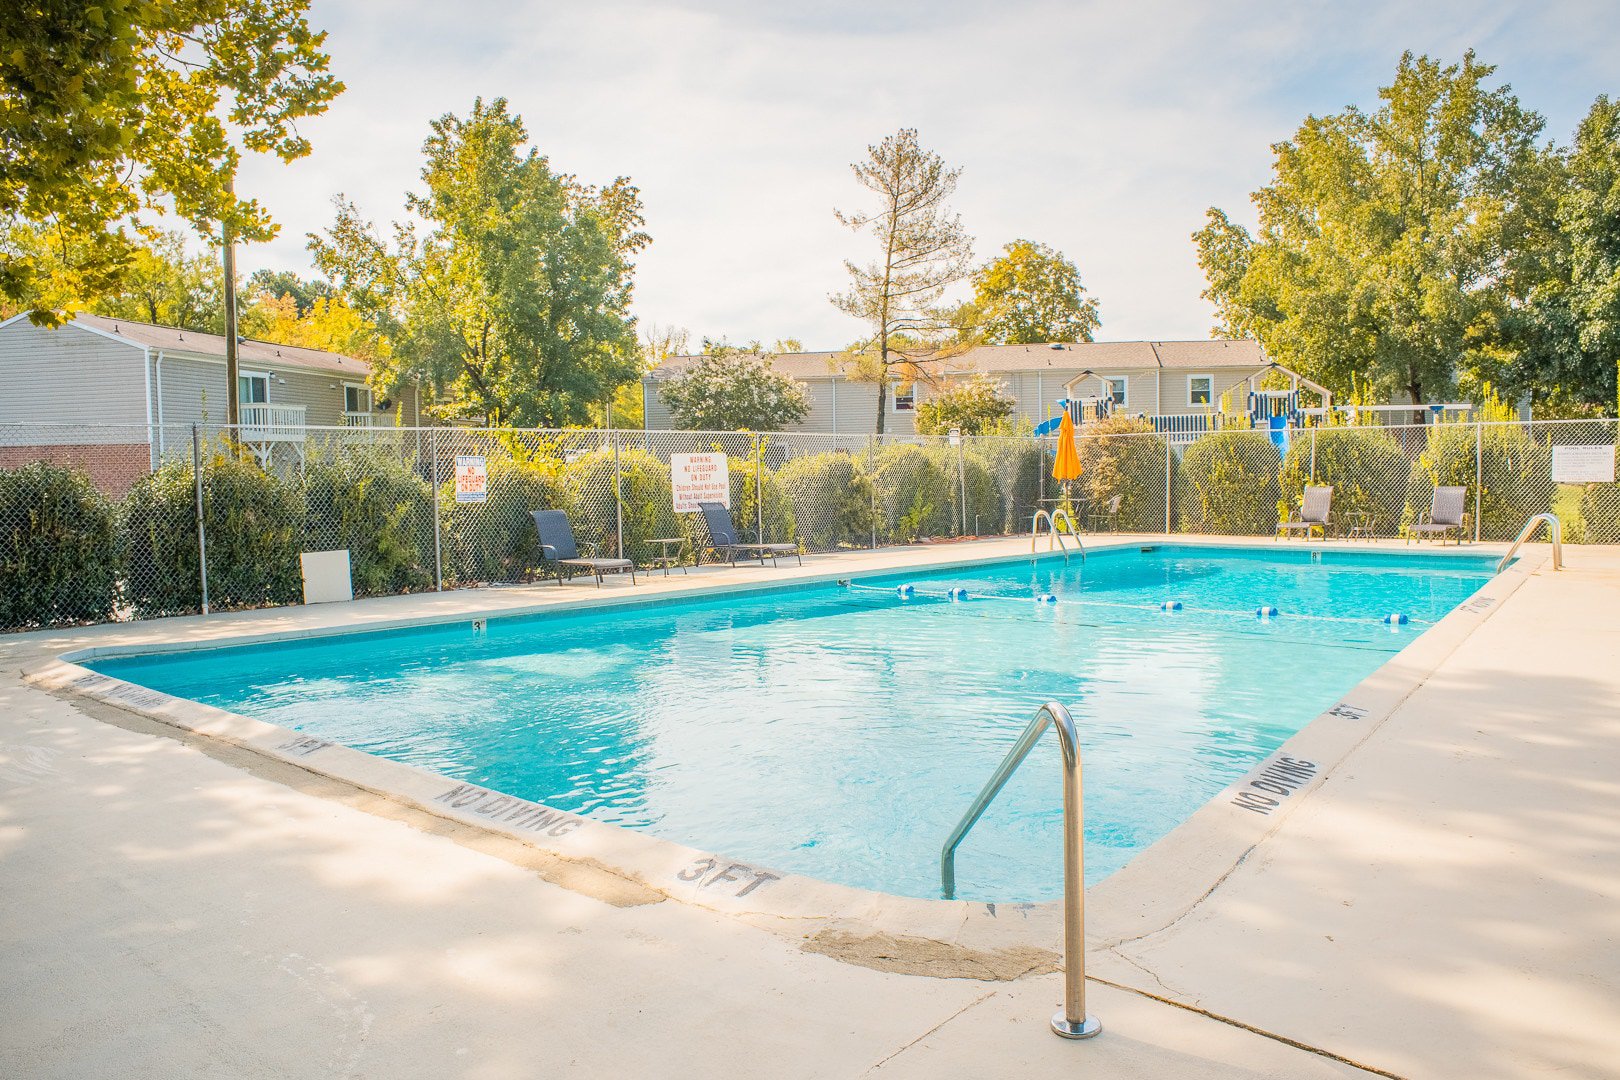 pool at Ashley Woods Apartments, located in the heart of Greensboro, North Carolina